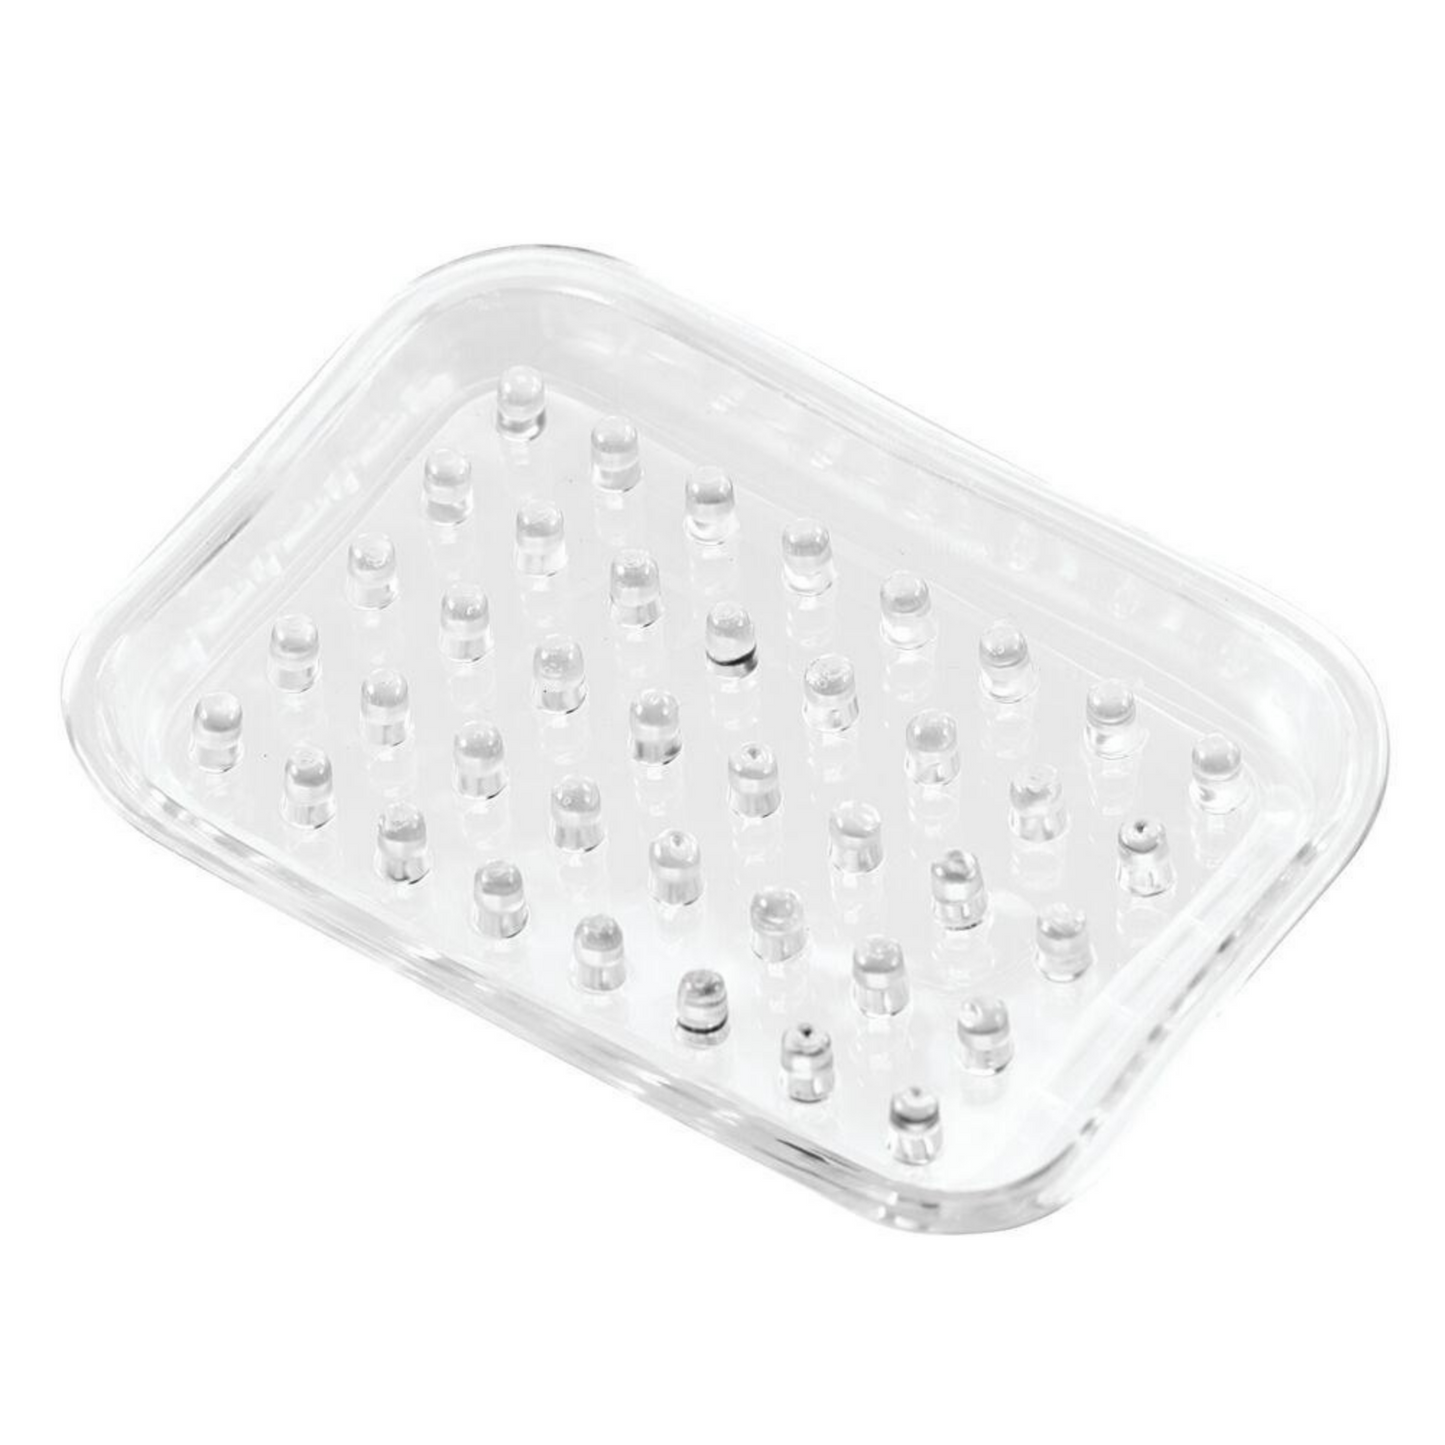 Primary image of Soap Saver Clear Dish